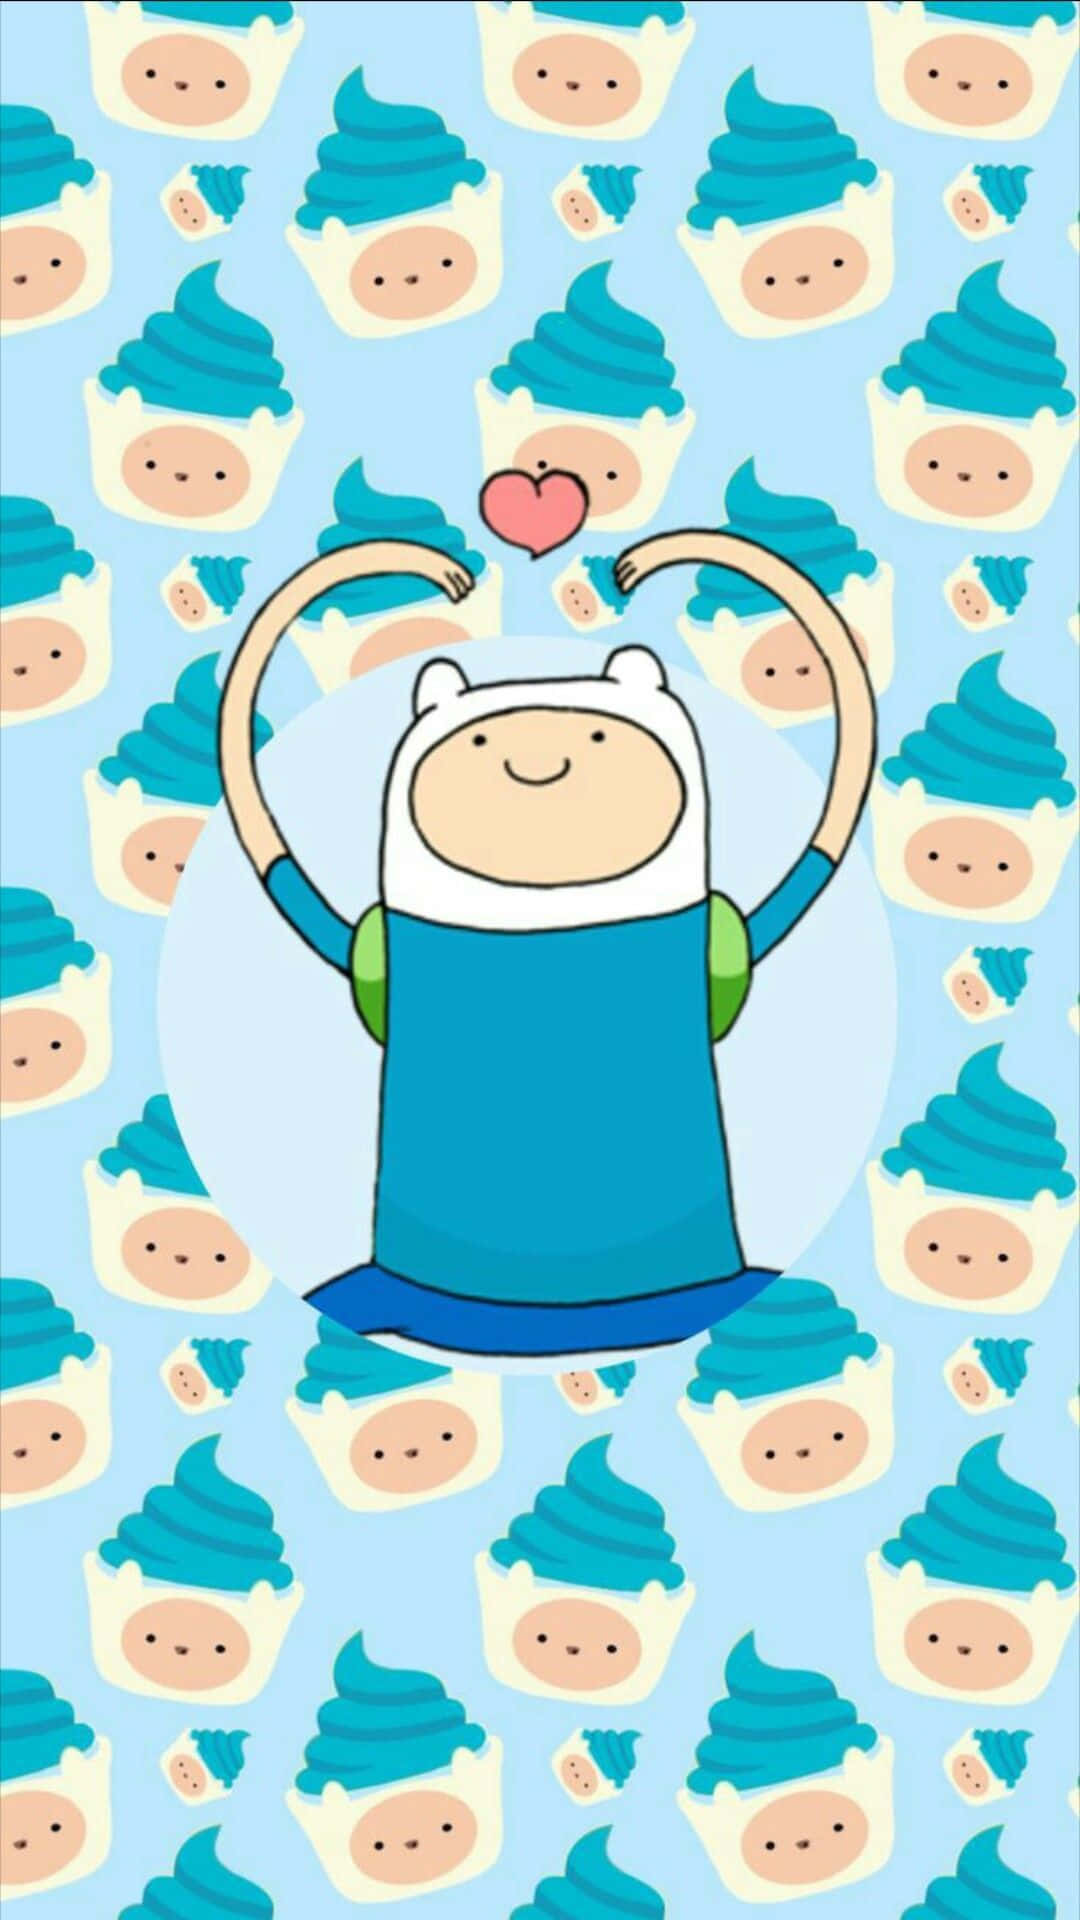 Geek out with Adventure Time iPhone wallpaper! Wallpaper